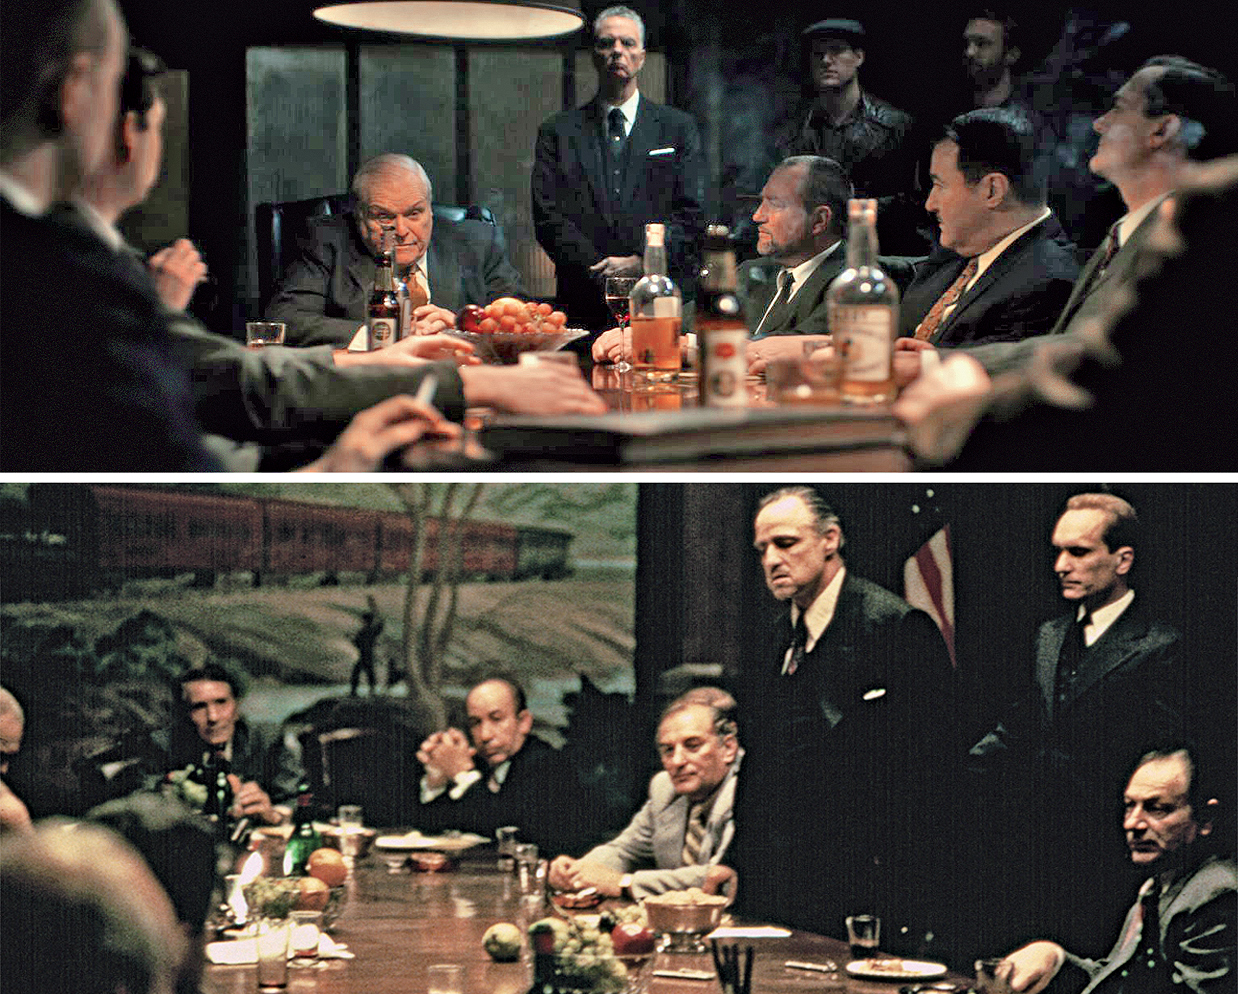 Public Morals, The Godfather